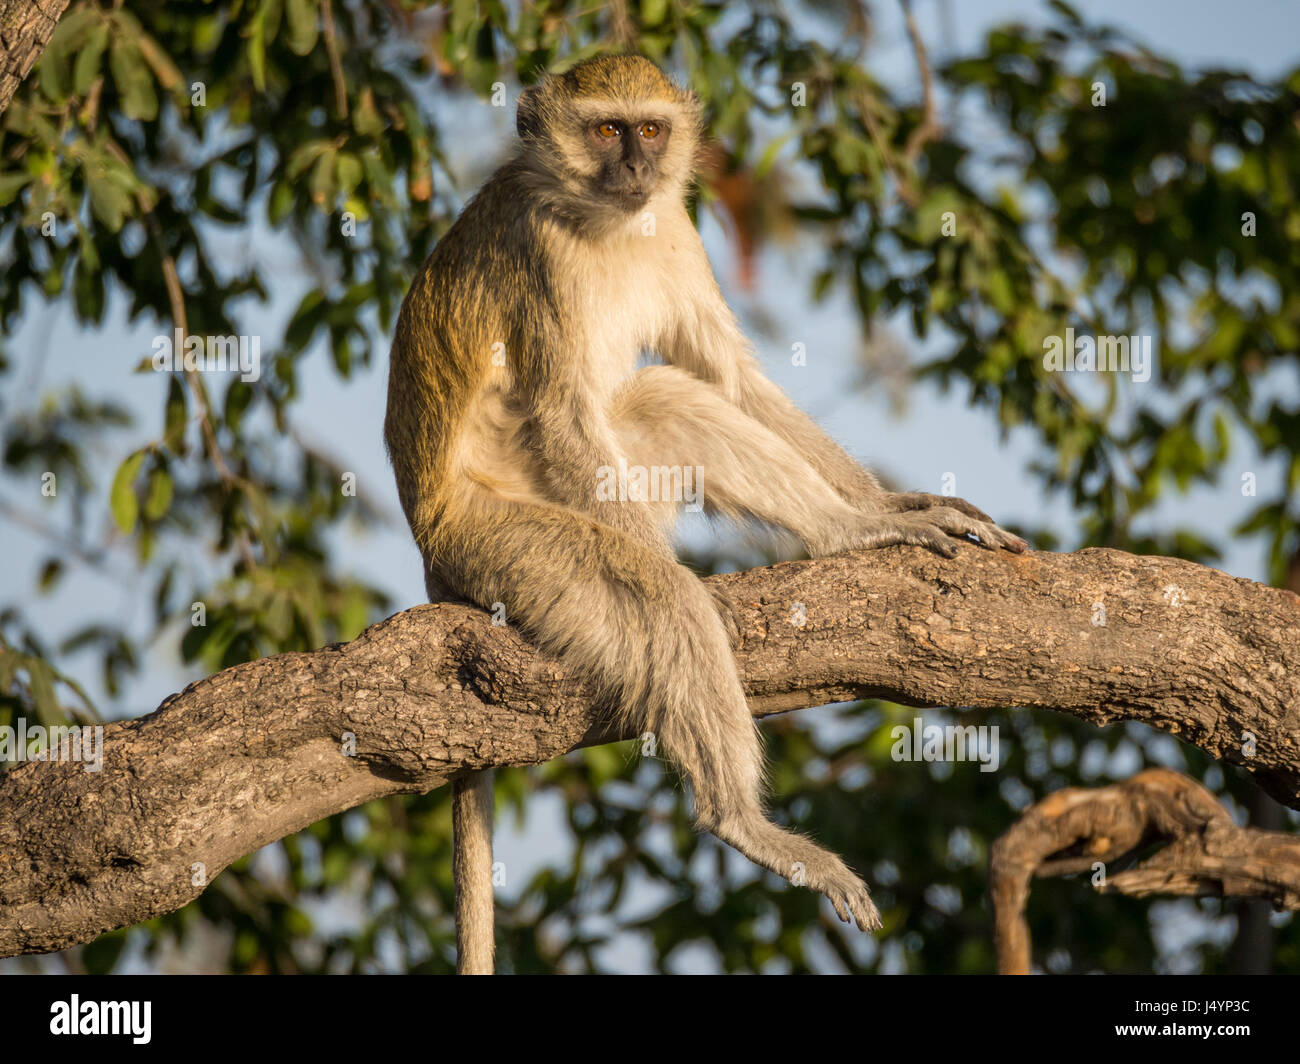 Vervet Monkey sitting relaxed in a tree on a sunny day, Chobe NP, Botswana, Africa. Stock Photo